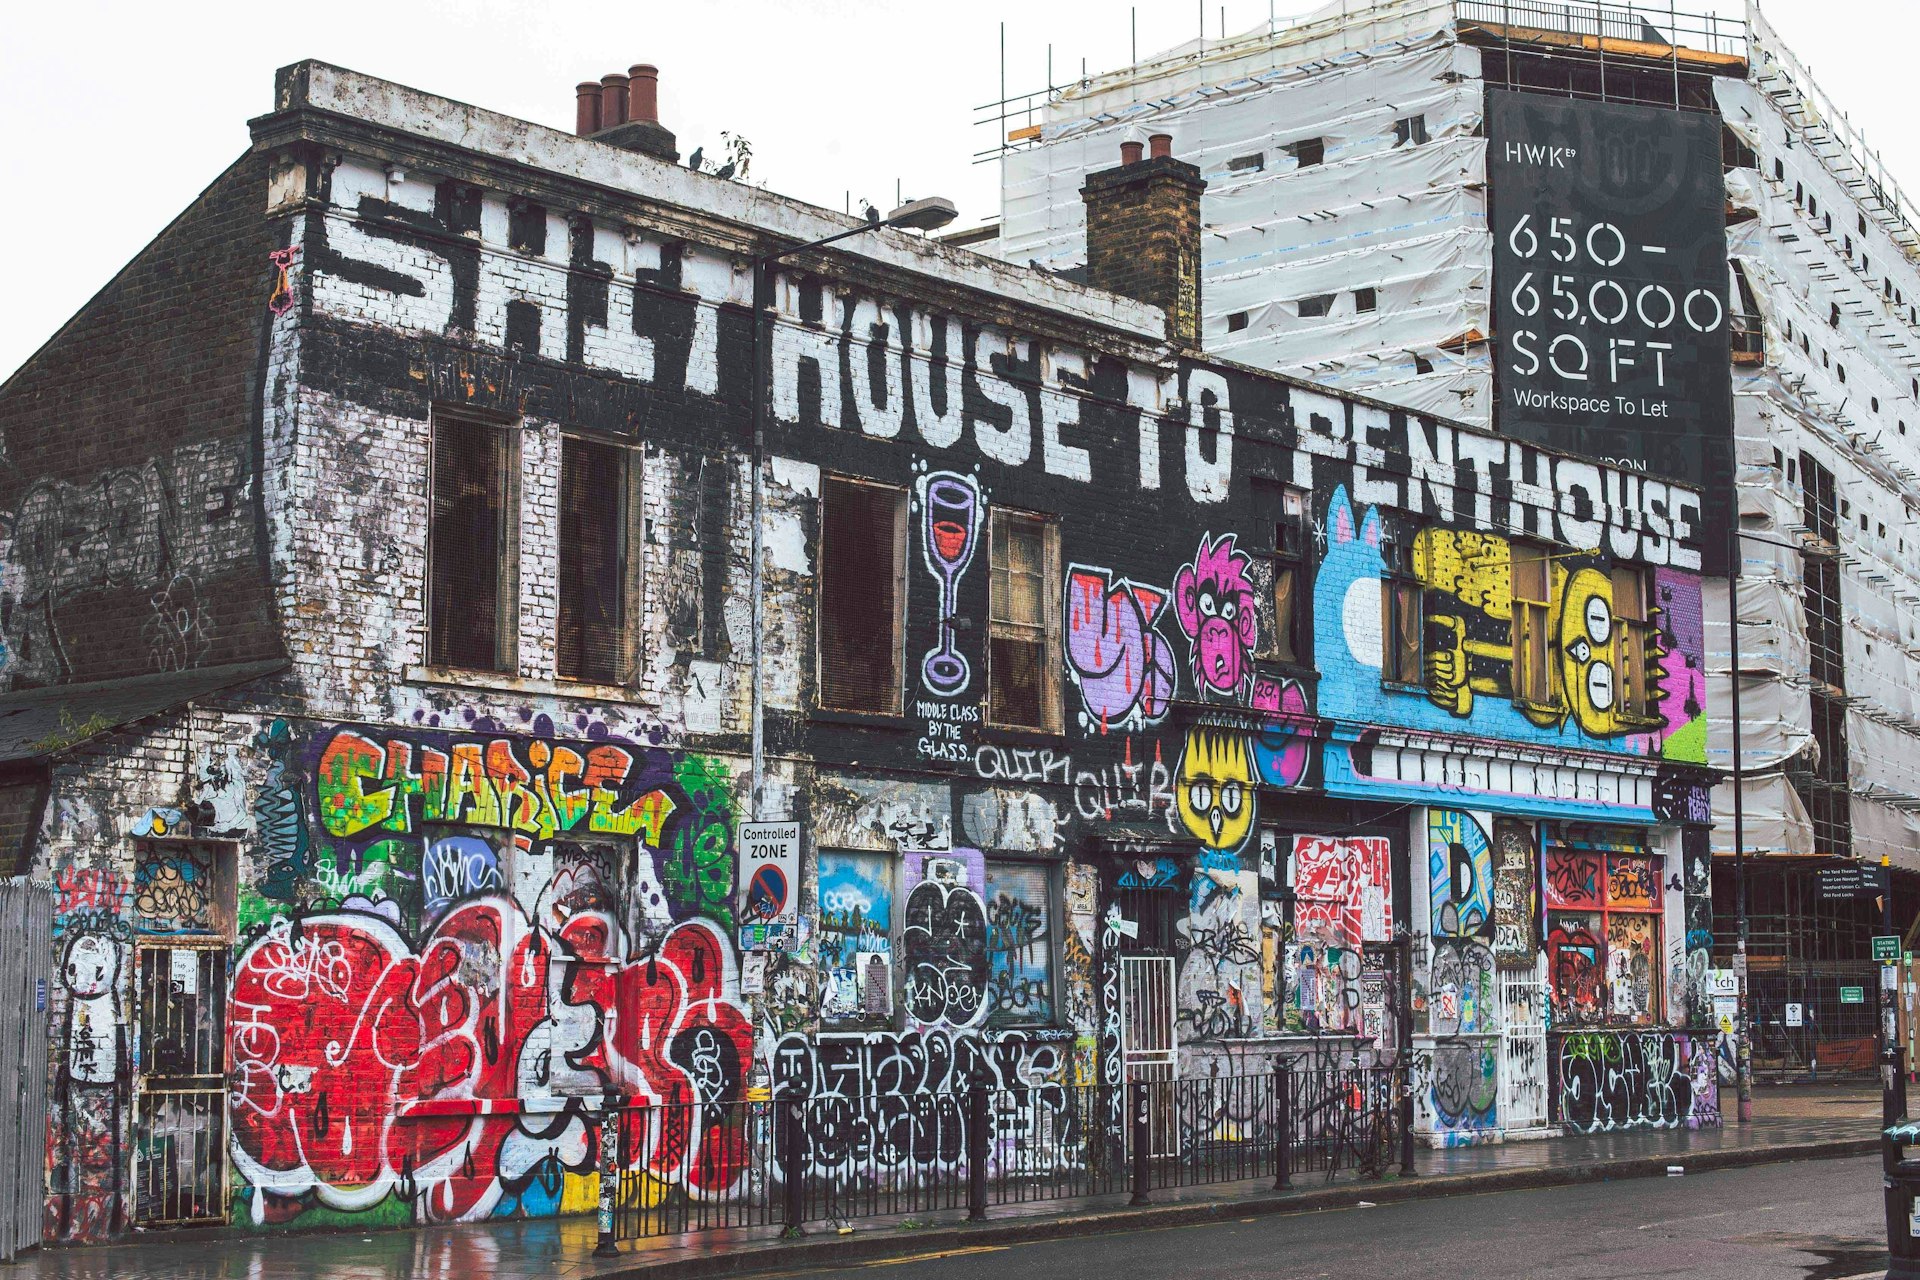 The battle to save east London: is this finally the end?